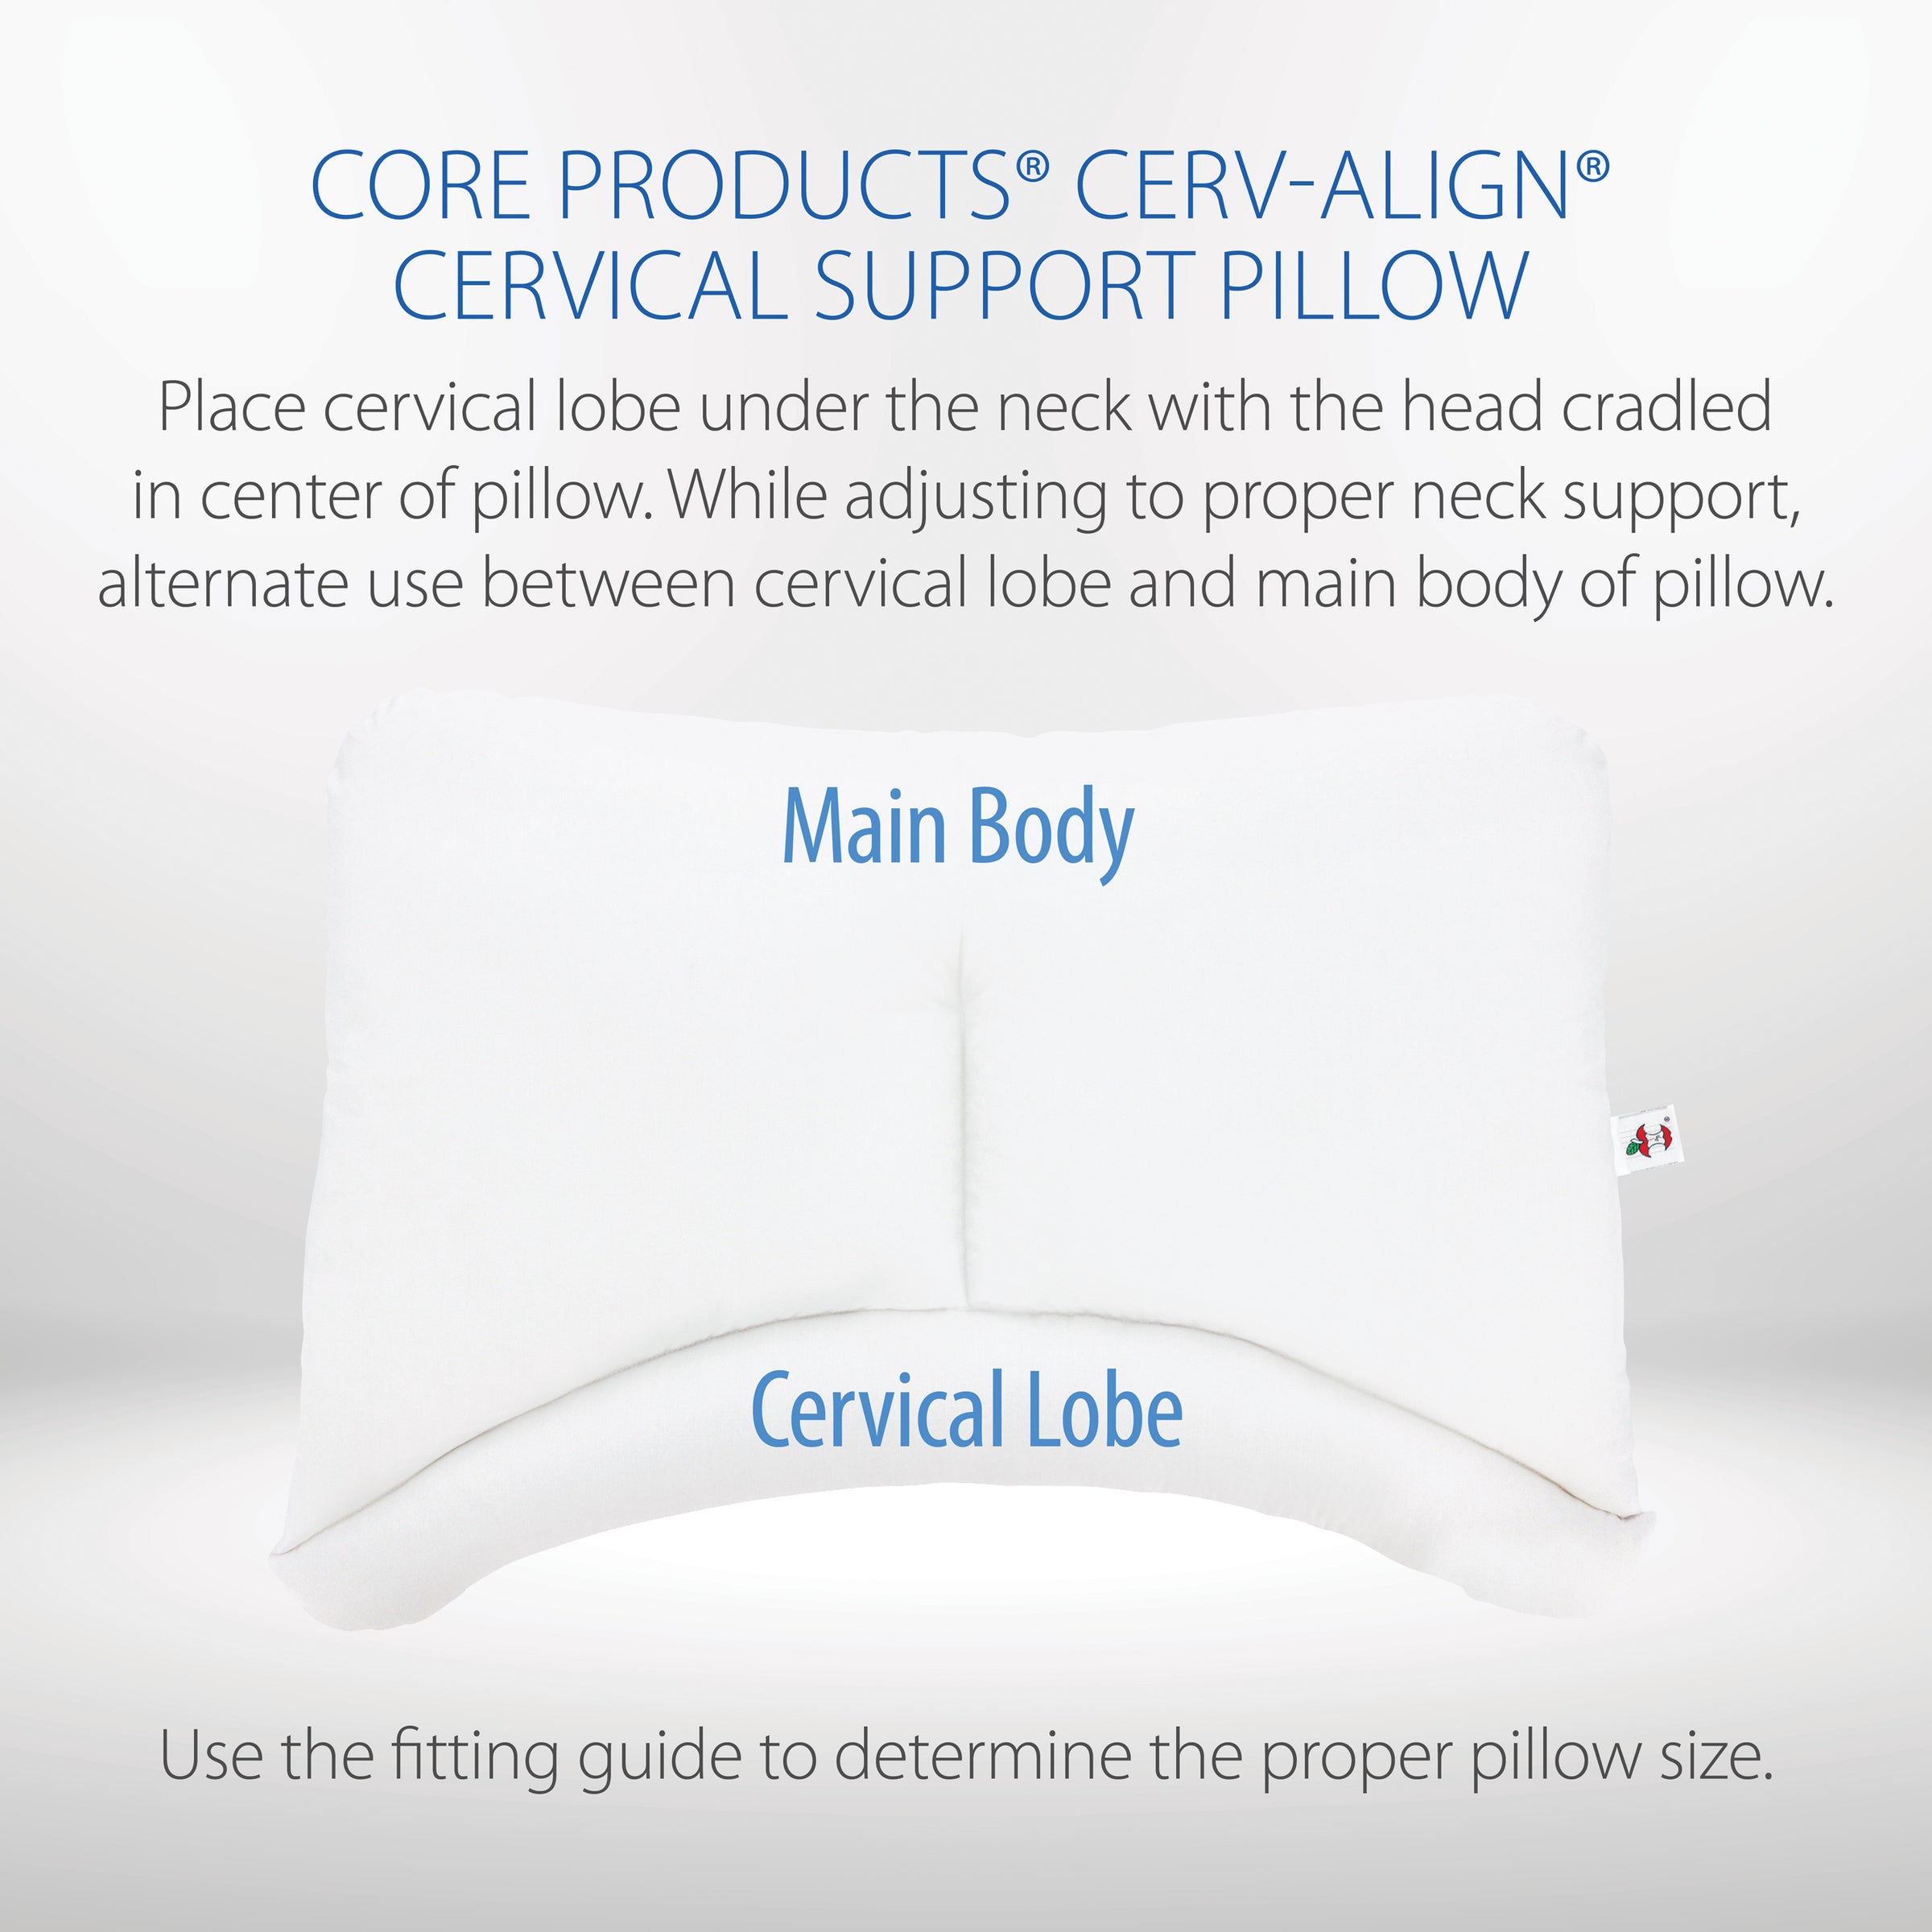 Cerv-Align Cervical Support Pillow - physio supplies canada